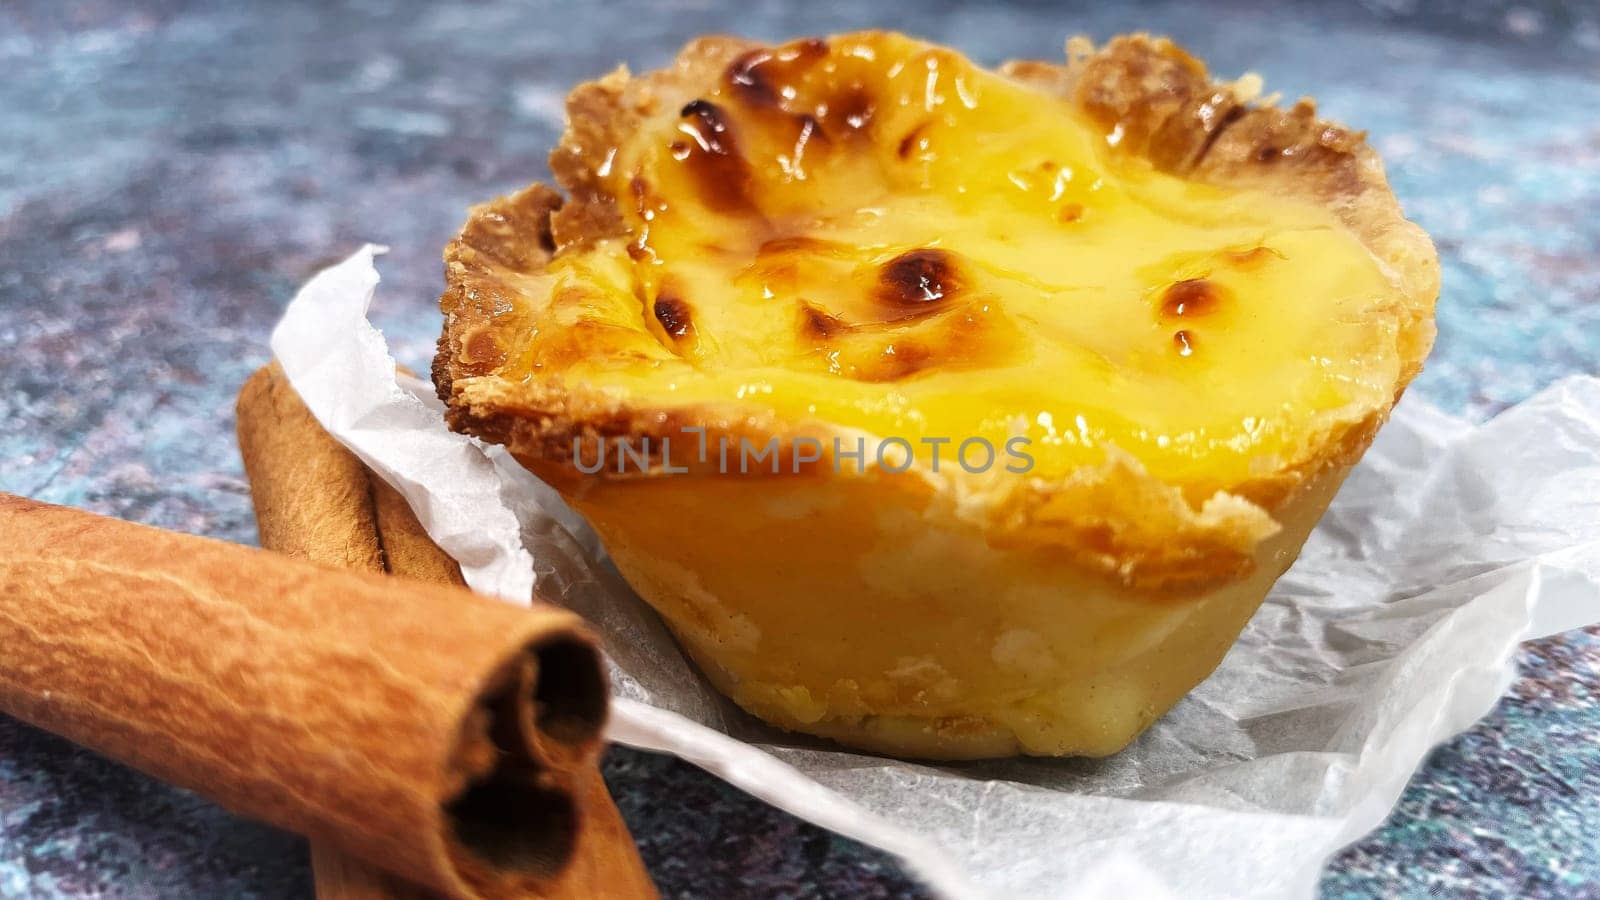 One Pastel de nata or Portuguese egg tart and cinnamon sticks. Pastel de Belm is a small pie with a crispy puff pastry crust and a custard cream filling